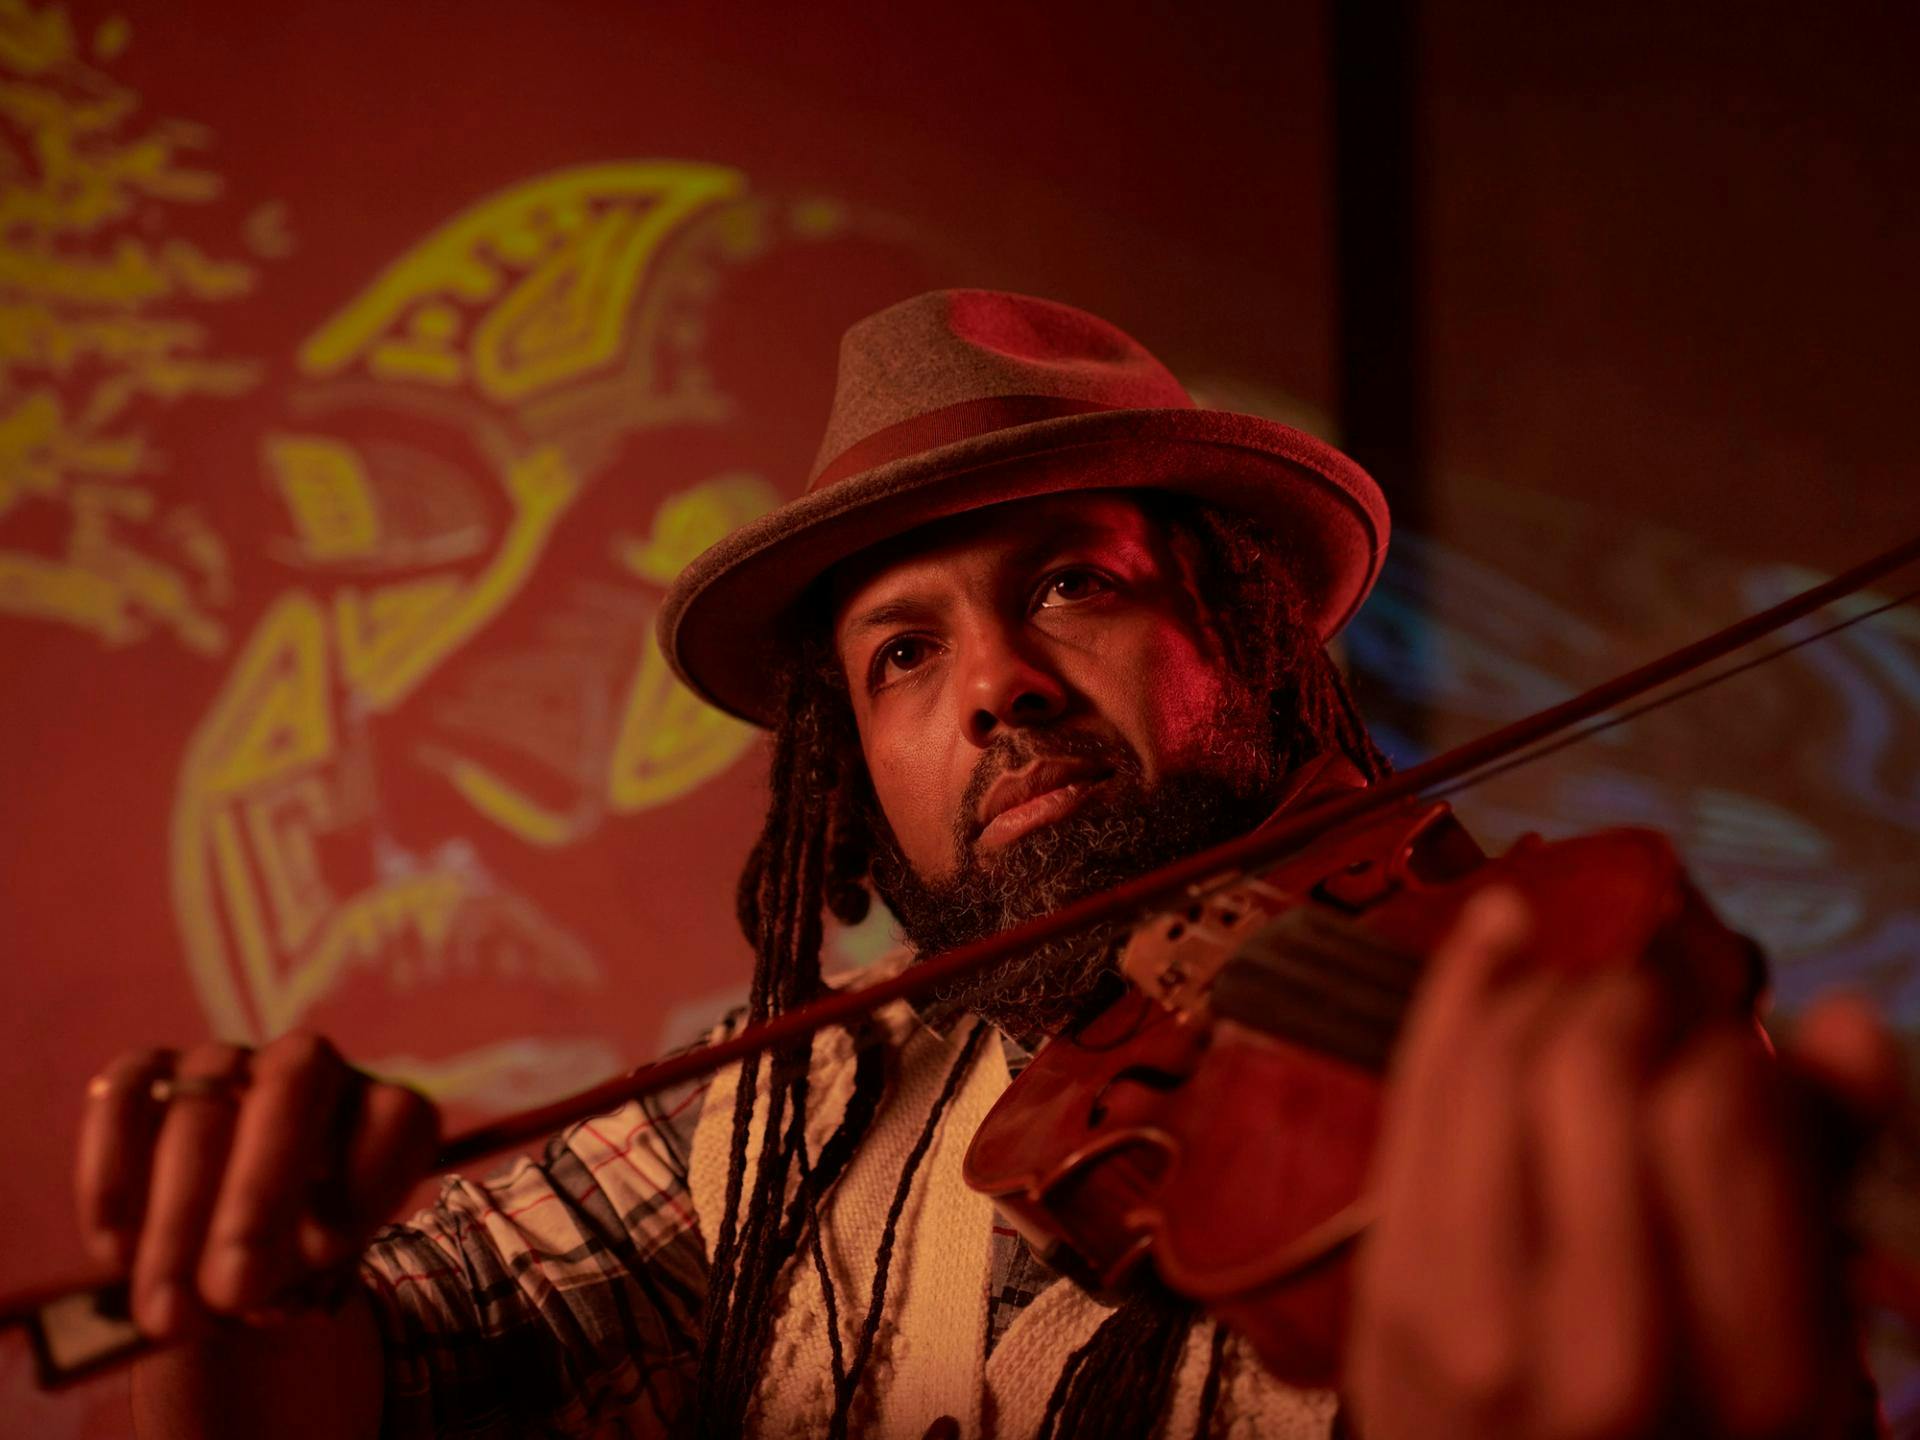 A man plays the violin while looking off in the distance with abstract projections behind him